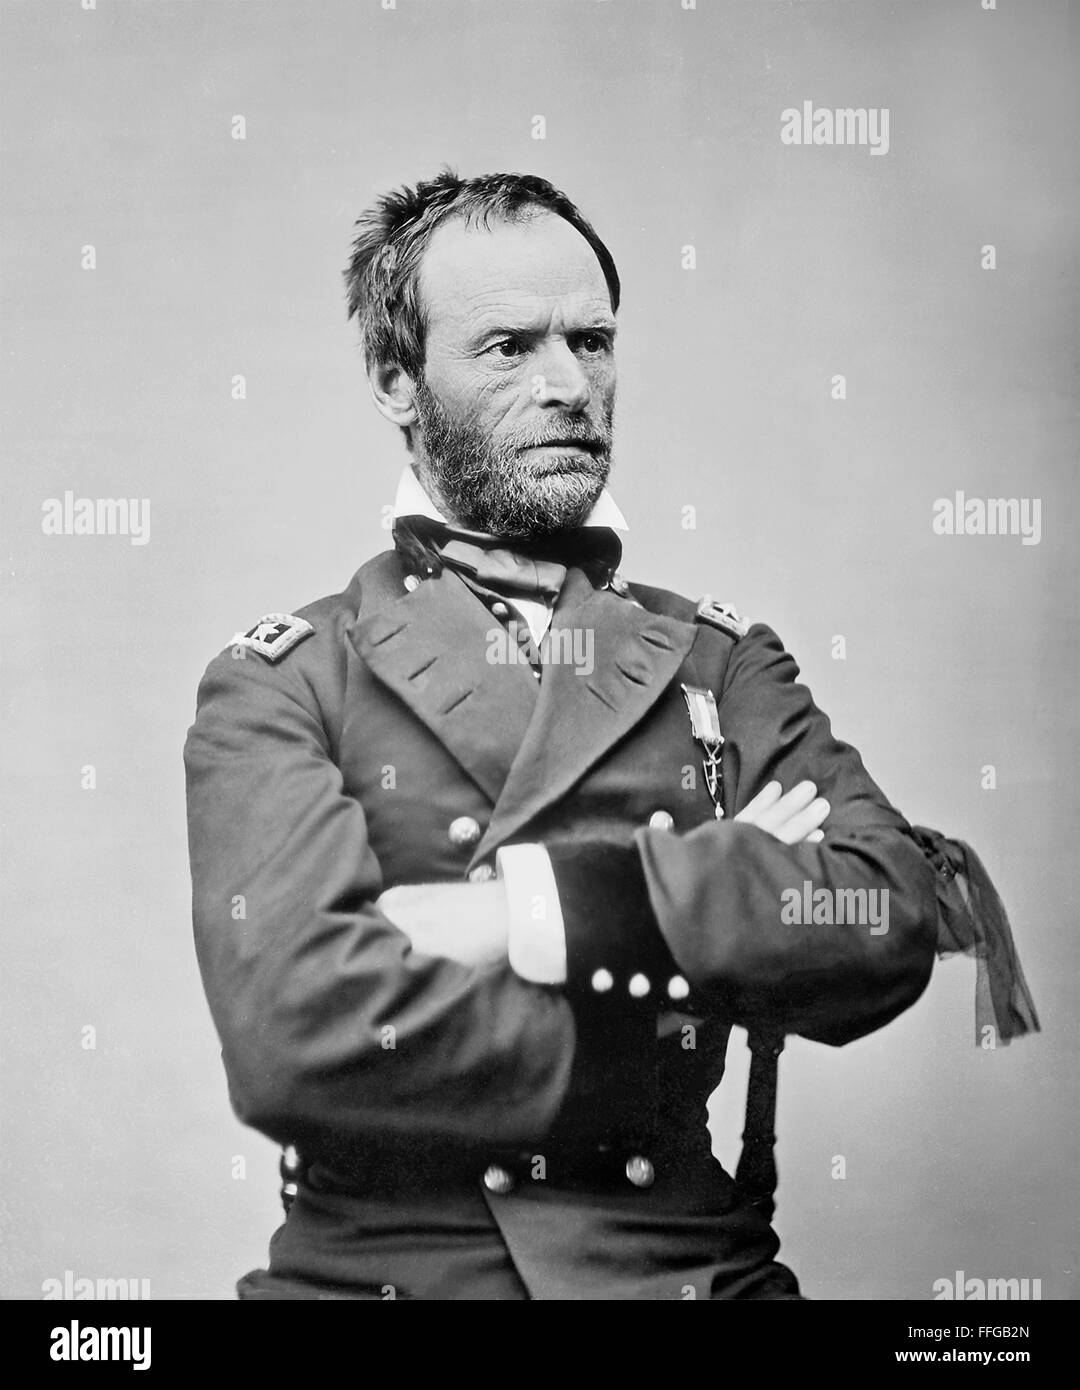 General Sherman. Portrait of General William Tecumseh Sherman, a commander in the Union army during the American Civil War, wearing a black armband following the assassination of President Lincoln,  Date of photo 1865 by Mathew Brady. Stock Photo